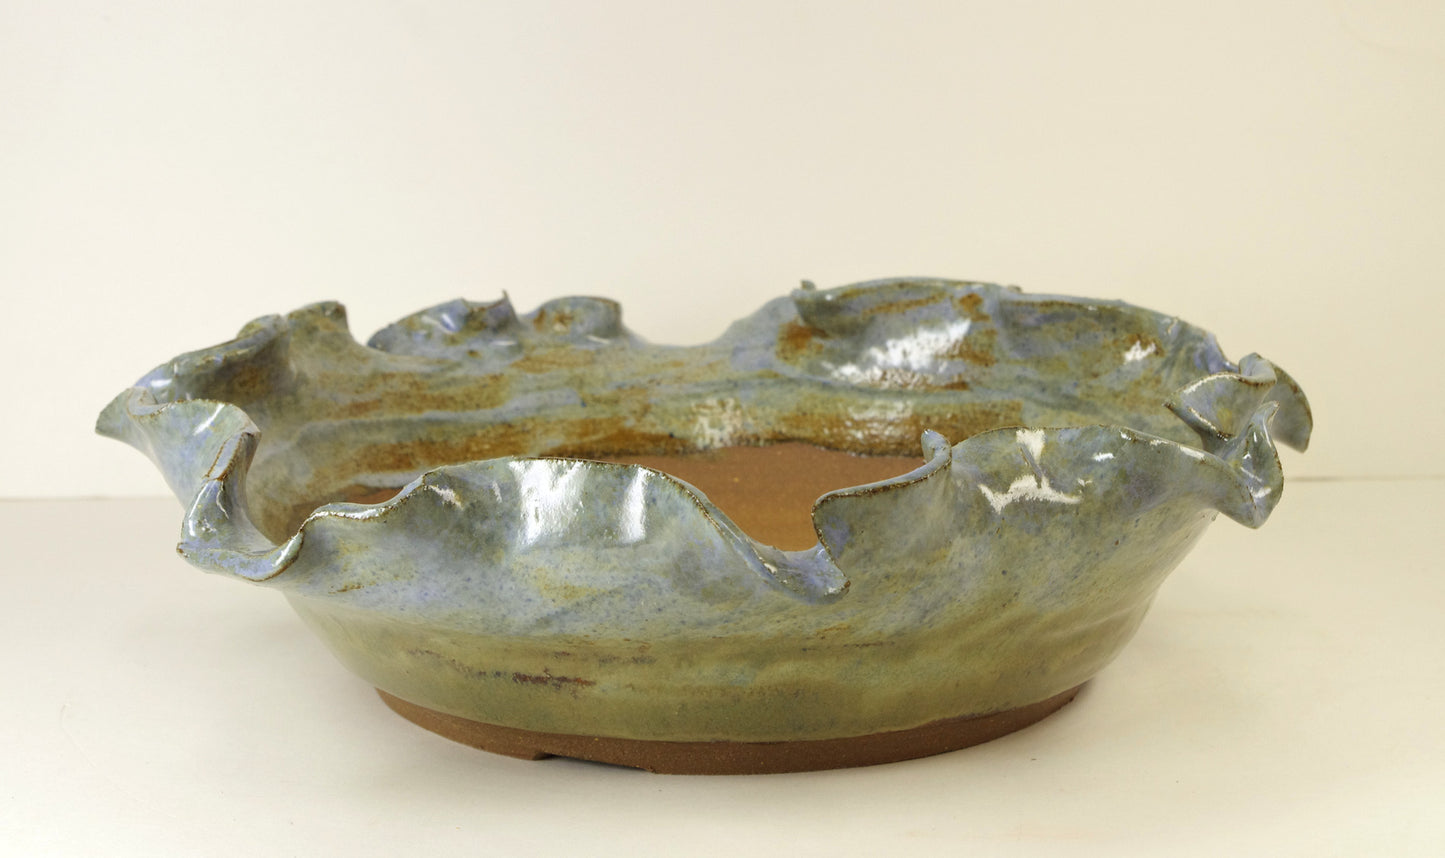 2068, Hand Thrown and Altered Stonware Bonsai Pot, Blues Greens Browns, 11 x 2.5